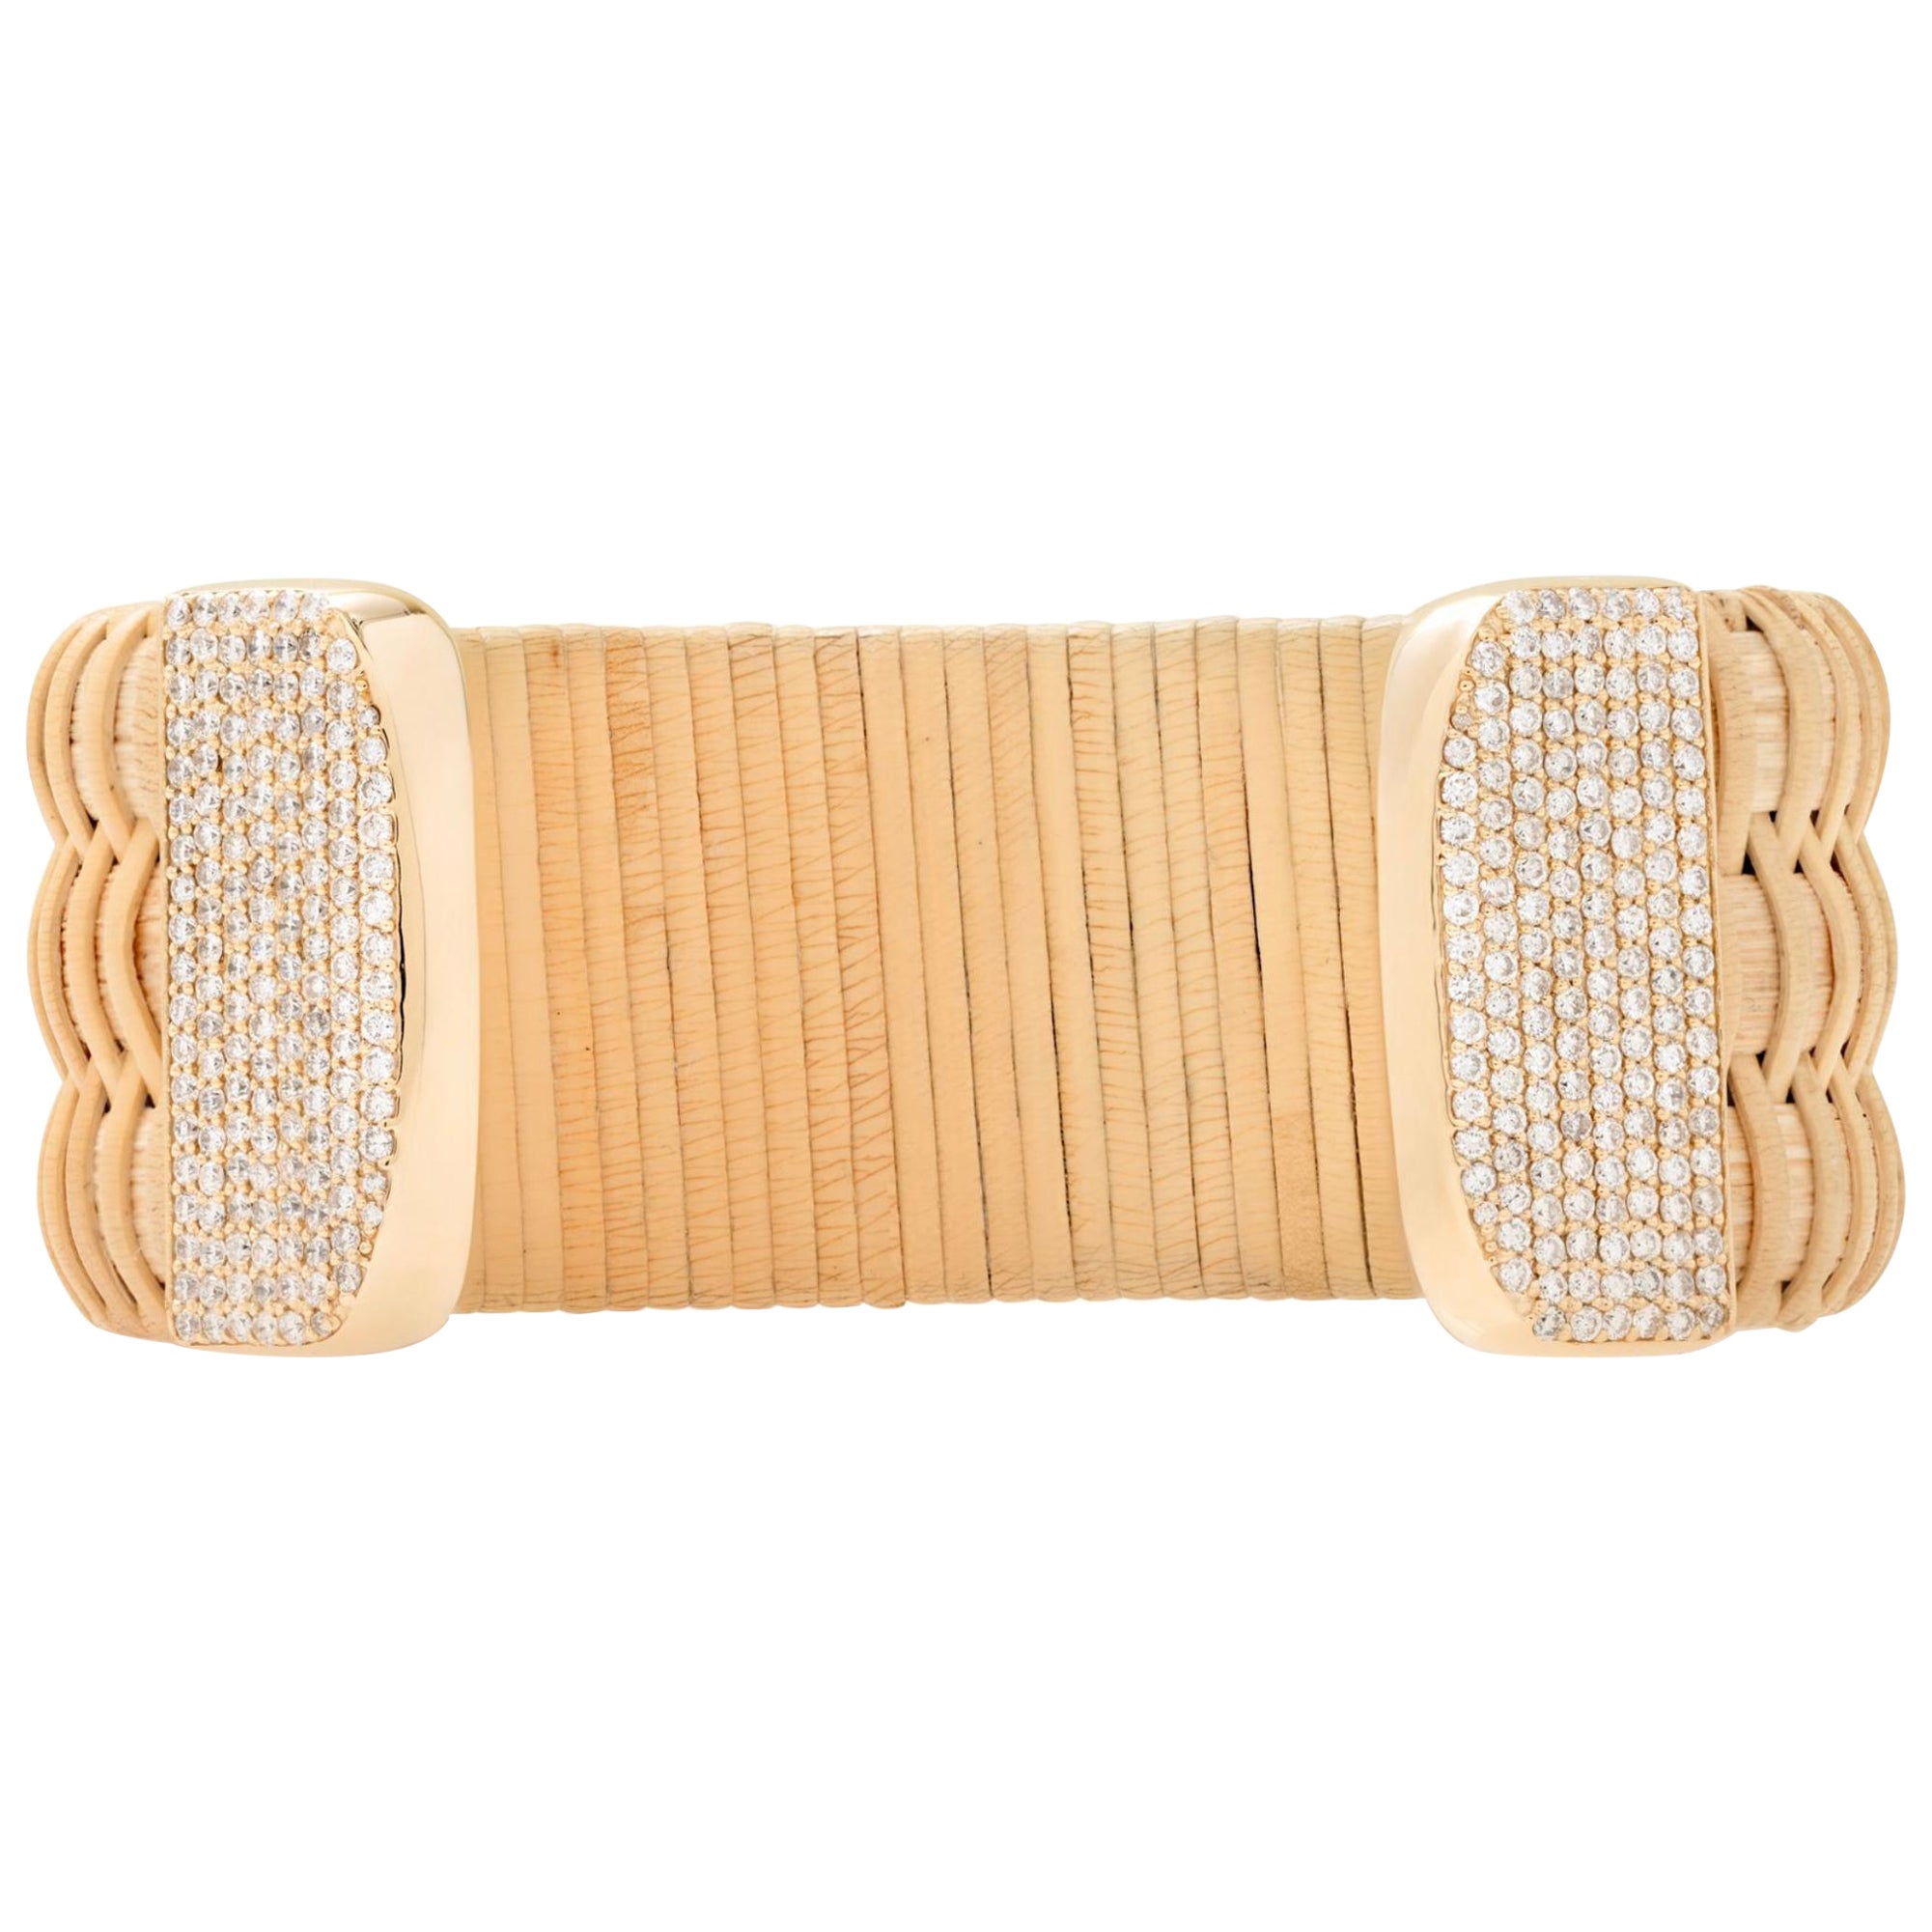 Paris & Lily Nantucket Lightship Basket Cuff with Gold and Diamonds For Sale